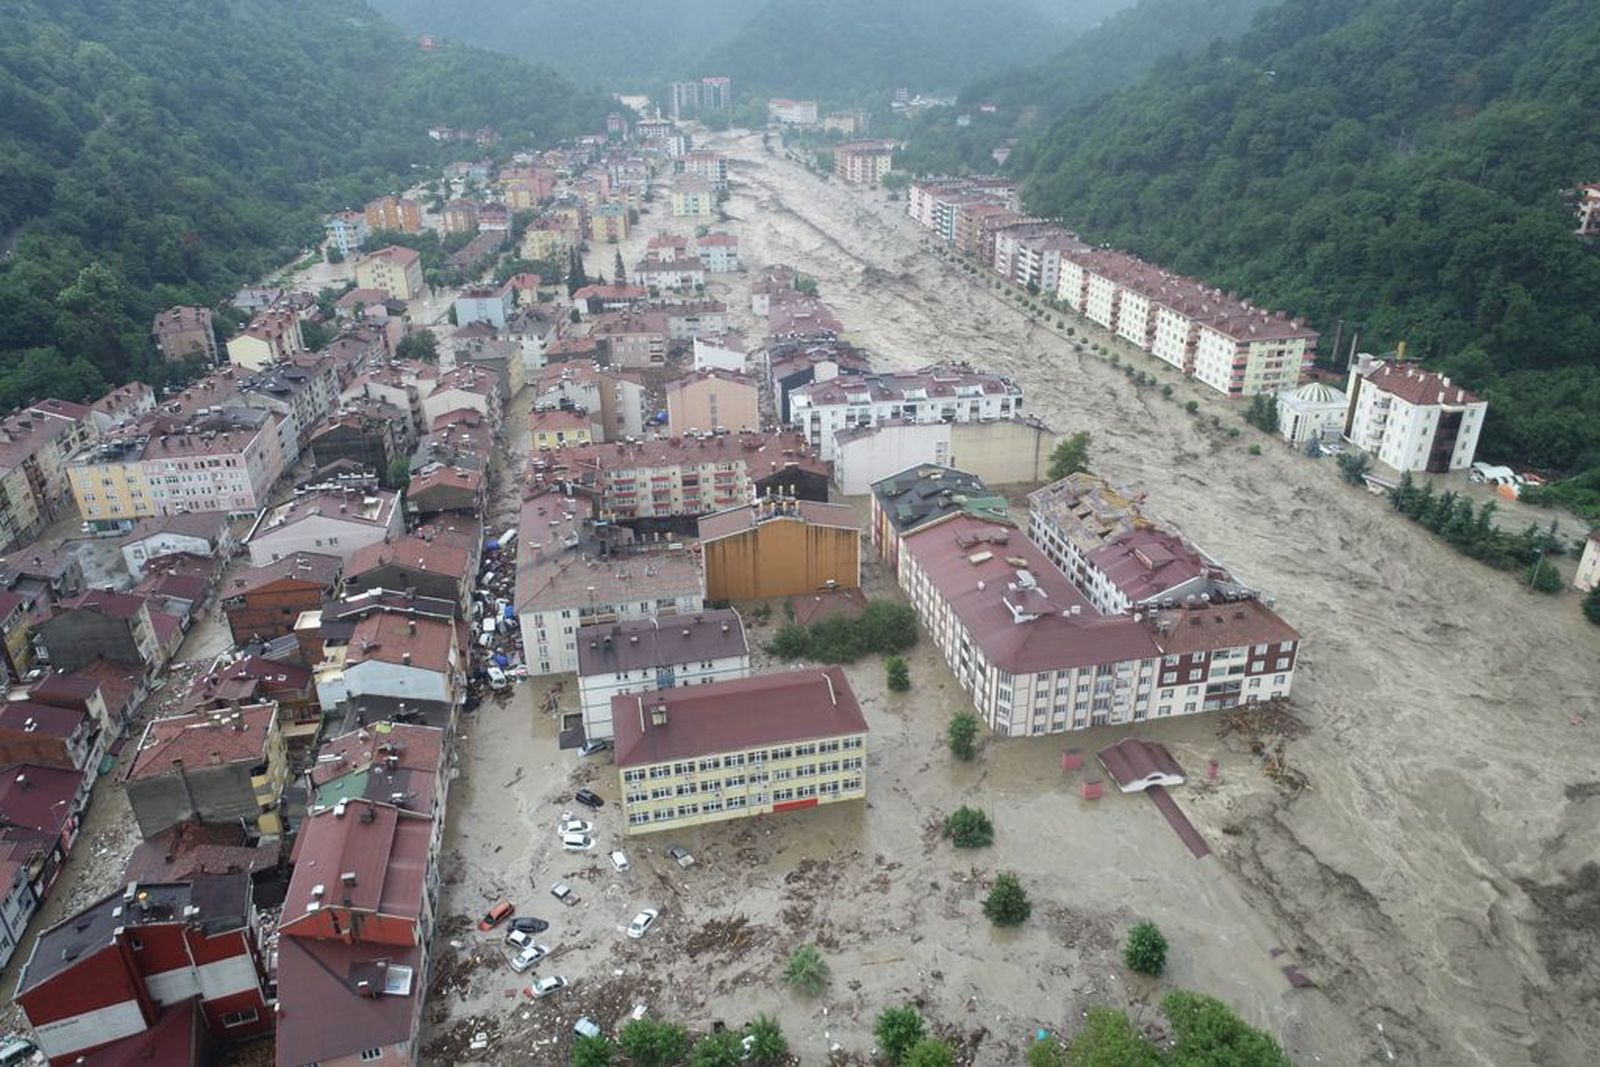 epa09410638 A drone photo shows an aerial view of flooded buildings due to heavy rains in Bozkurt district of Kastamonu, Turkey, 11 August 2021 (issued 12 August 2021). At least one person was killed and several are missing due to flooding in Northern Turkey.  


TURKEY OUT, USA OUT, UK OUT, CANADA OUT, FRANCE OUT, SWEDEN OUT, IRAQ OUT, JORDAN OUT, KUWAIT OUT, LEBANON OUT, OMAN OUT, QATAR OUT, SAUDI ARABIA OUT, SYRIA OUT, UAE OUT, YEMEN OUT, BAHRAIN OUT, EGYPT OUT, LIBYA OUT, ALGERIA OUT, MOROCCO OUT, TUNISIA OUT, AZERBAIJAN OUT, ALBANIA OUT, BOSNIA HERZEGOVINA OUT, BULGARIA OUT, KOSOVO OUT, CROATIA OUT, MACEDONIA OUT, MONTENEGRO OUT, SERBIA OUT, TURKEY OUT, USA OUT, UK OUT, CANADA OUT, FRANCE OUT, SWEDEN OUT, IRAQ OUT, JORDAN OUT, KUWAIT OUT, LEBANON OUT, OMAN OUT, QATAR OUT, SAUDI ARABIA OUT, SYRIA OUT, UAE OUT, YEMEN OUT, BAHRAIN OUT, EGYPT OUT, LIBYA OUT, ALGERIA OUT, MOROCCO OUT, TUNISIA OUT, AZERBAIJAN OUT, ALBANIA OUT, BOSNIA HERZEGOVINA OUT, BULGARIA OUT, KOSOVO OUT, CROATIA OUT, MACEDONIA OUT, MONTENEGRO OUT, SERBIA OUT  EPA/UMIT YORULMAZ